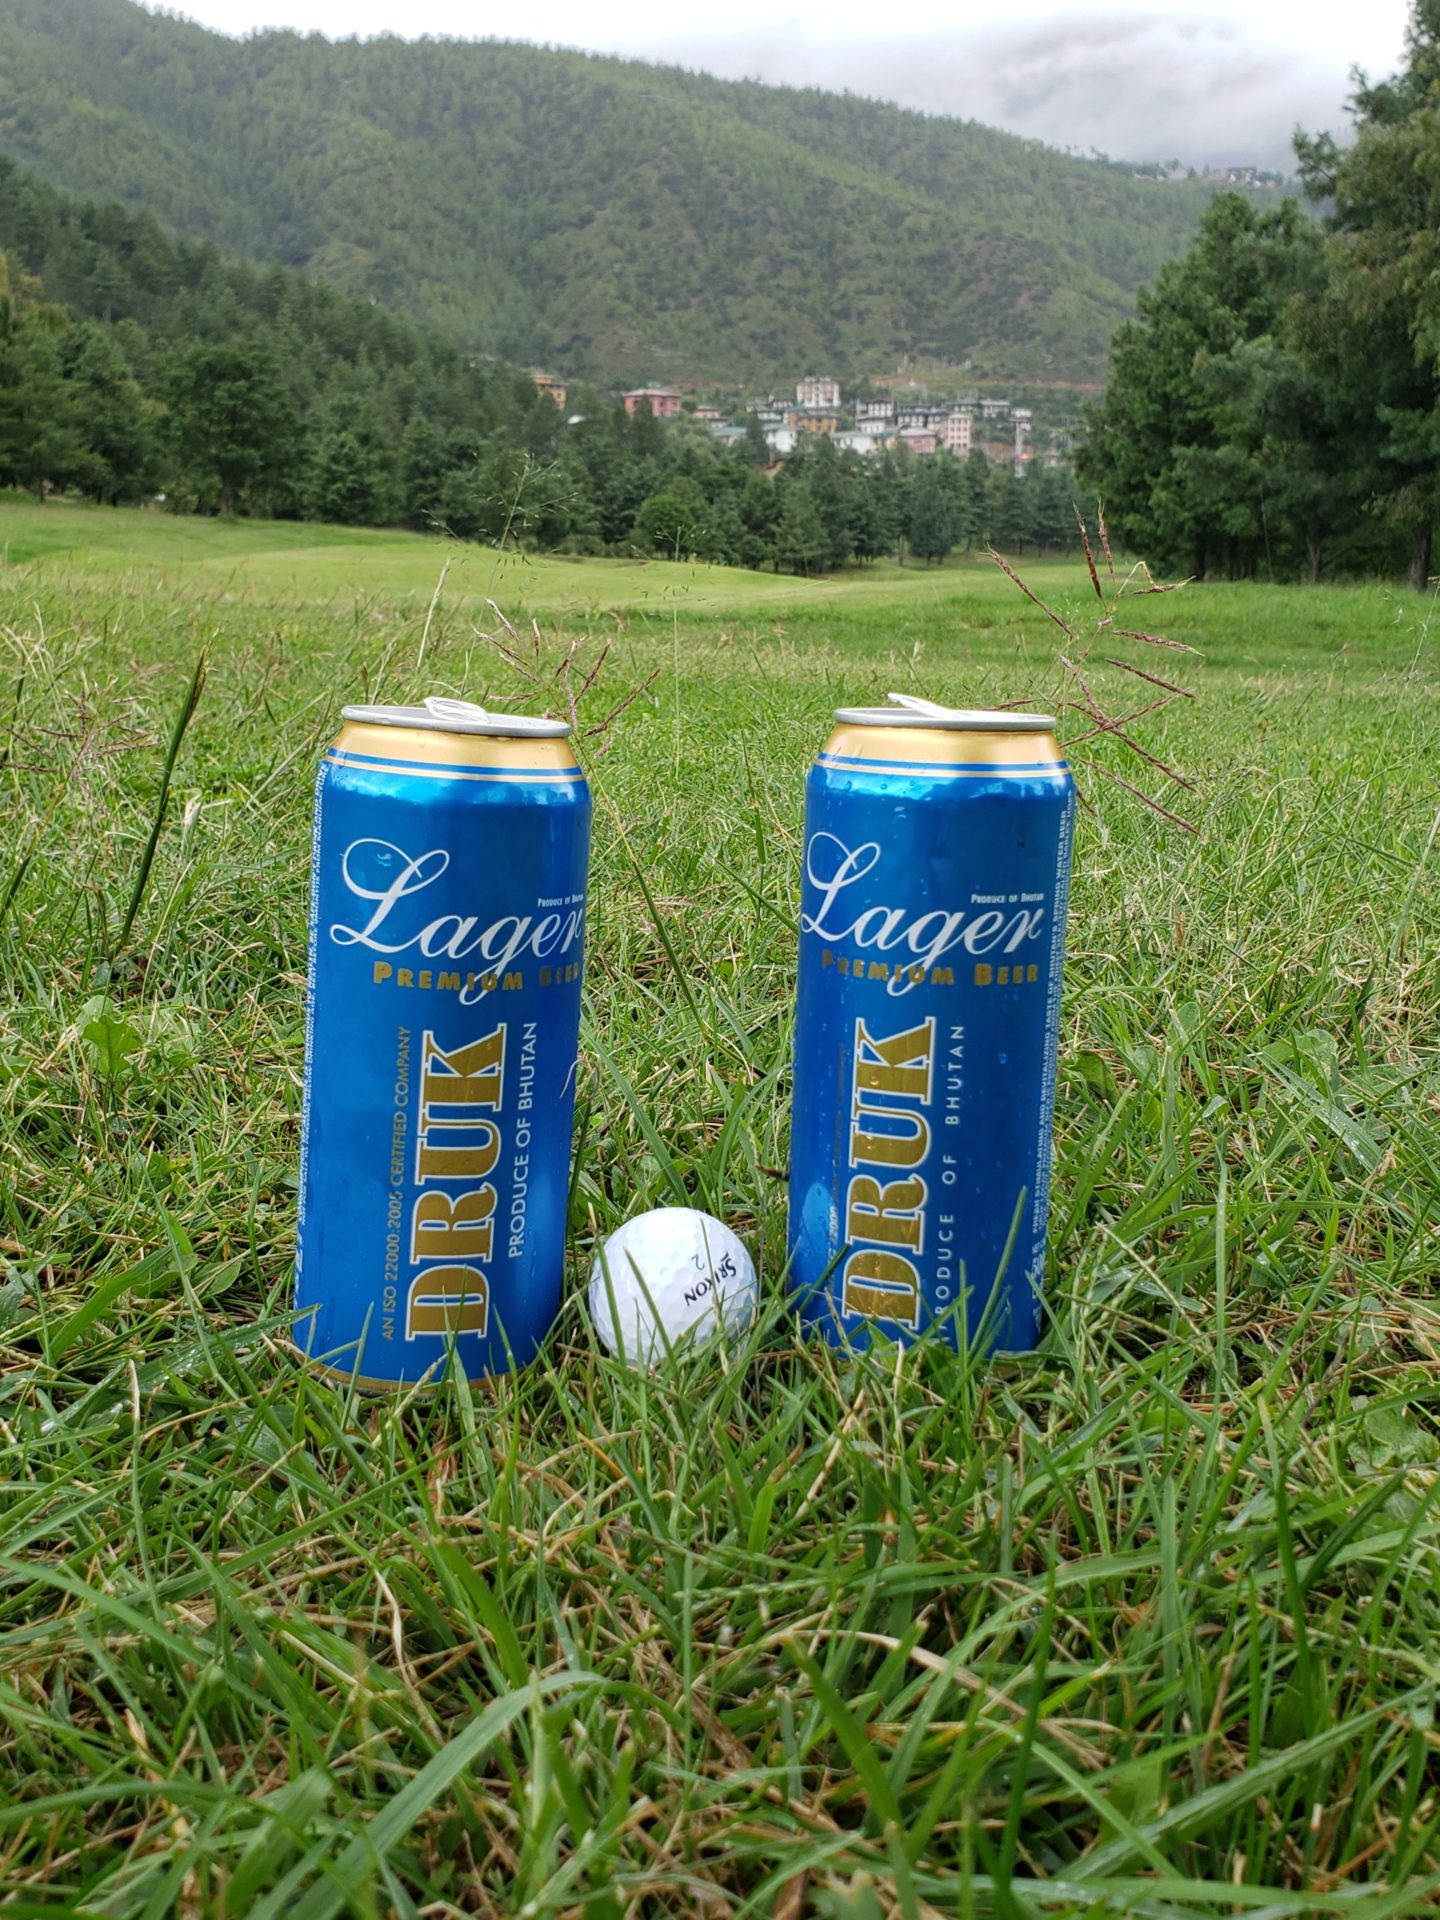 two cans of beer in the grass